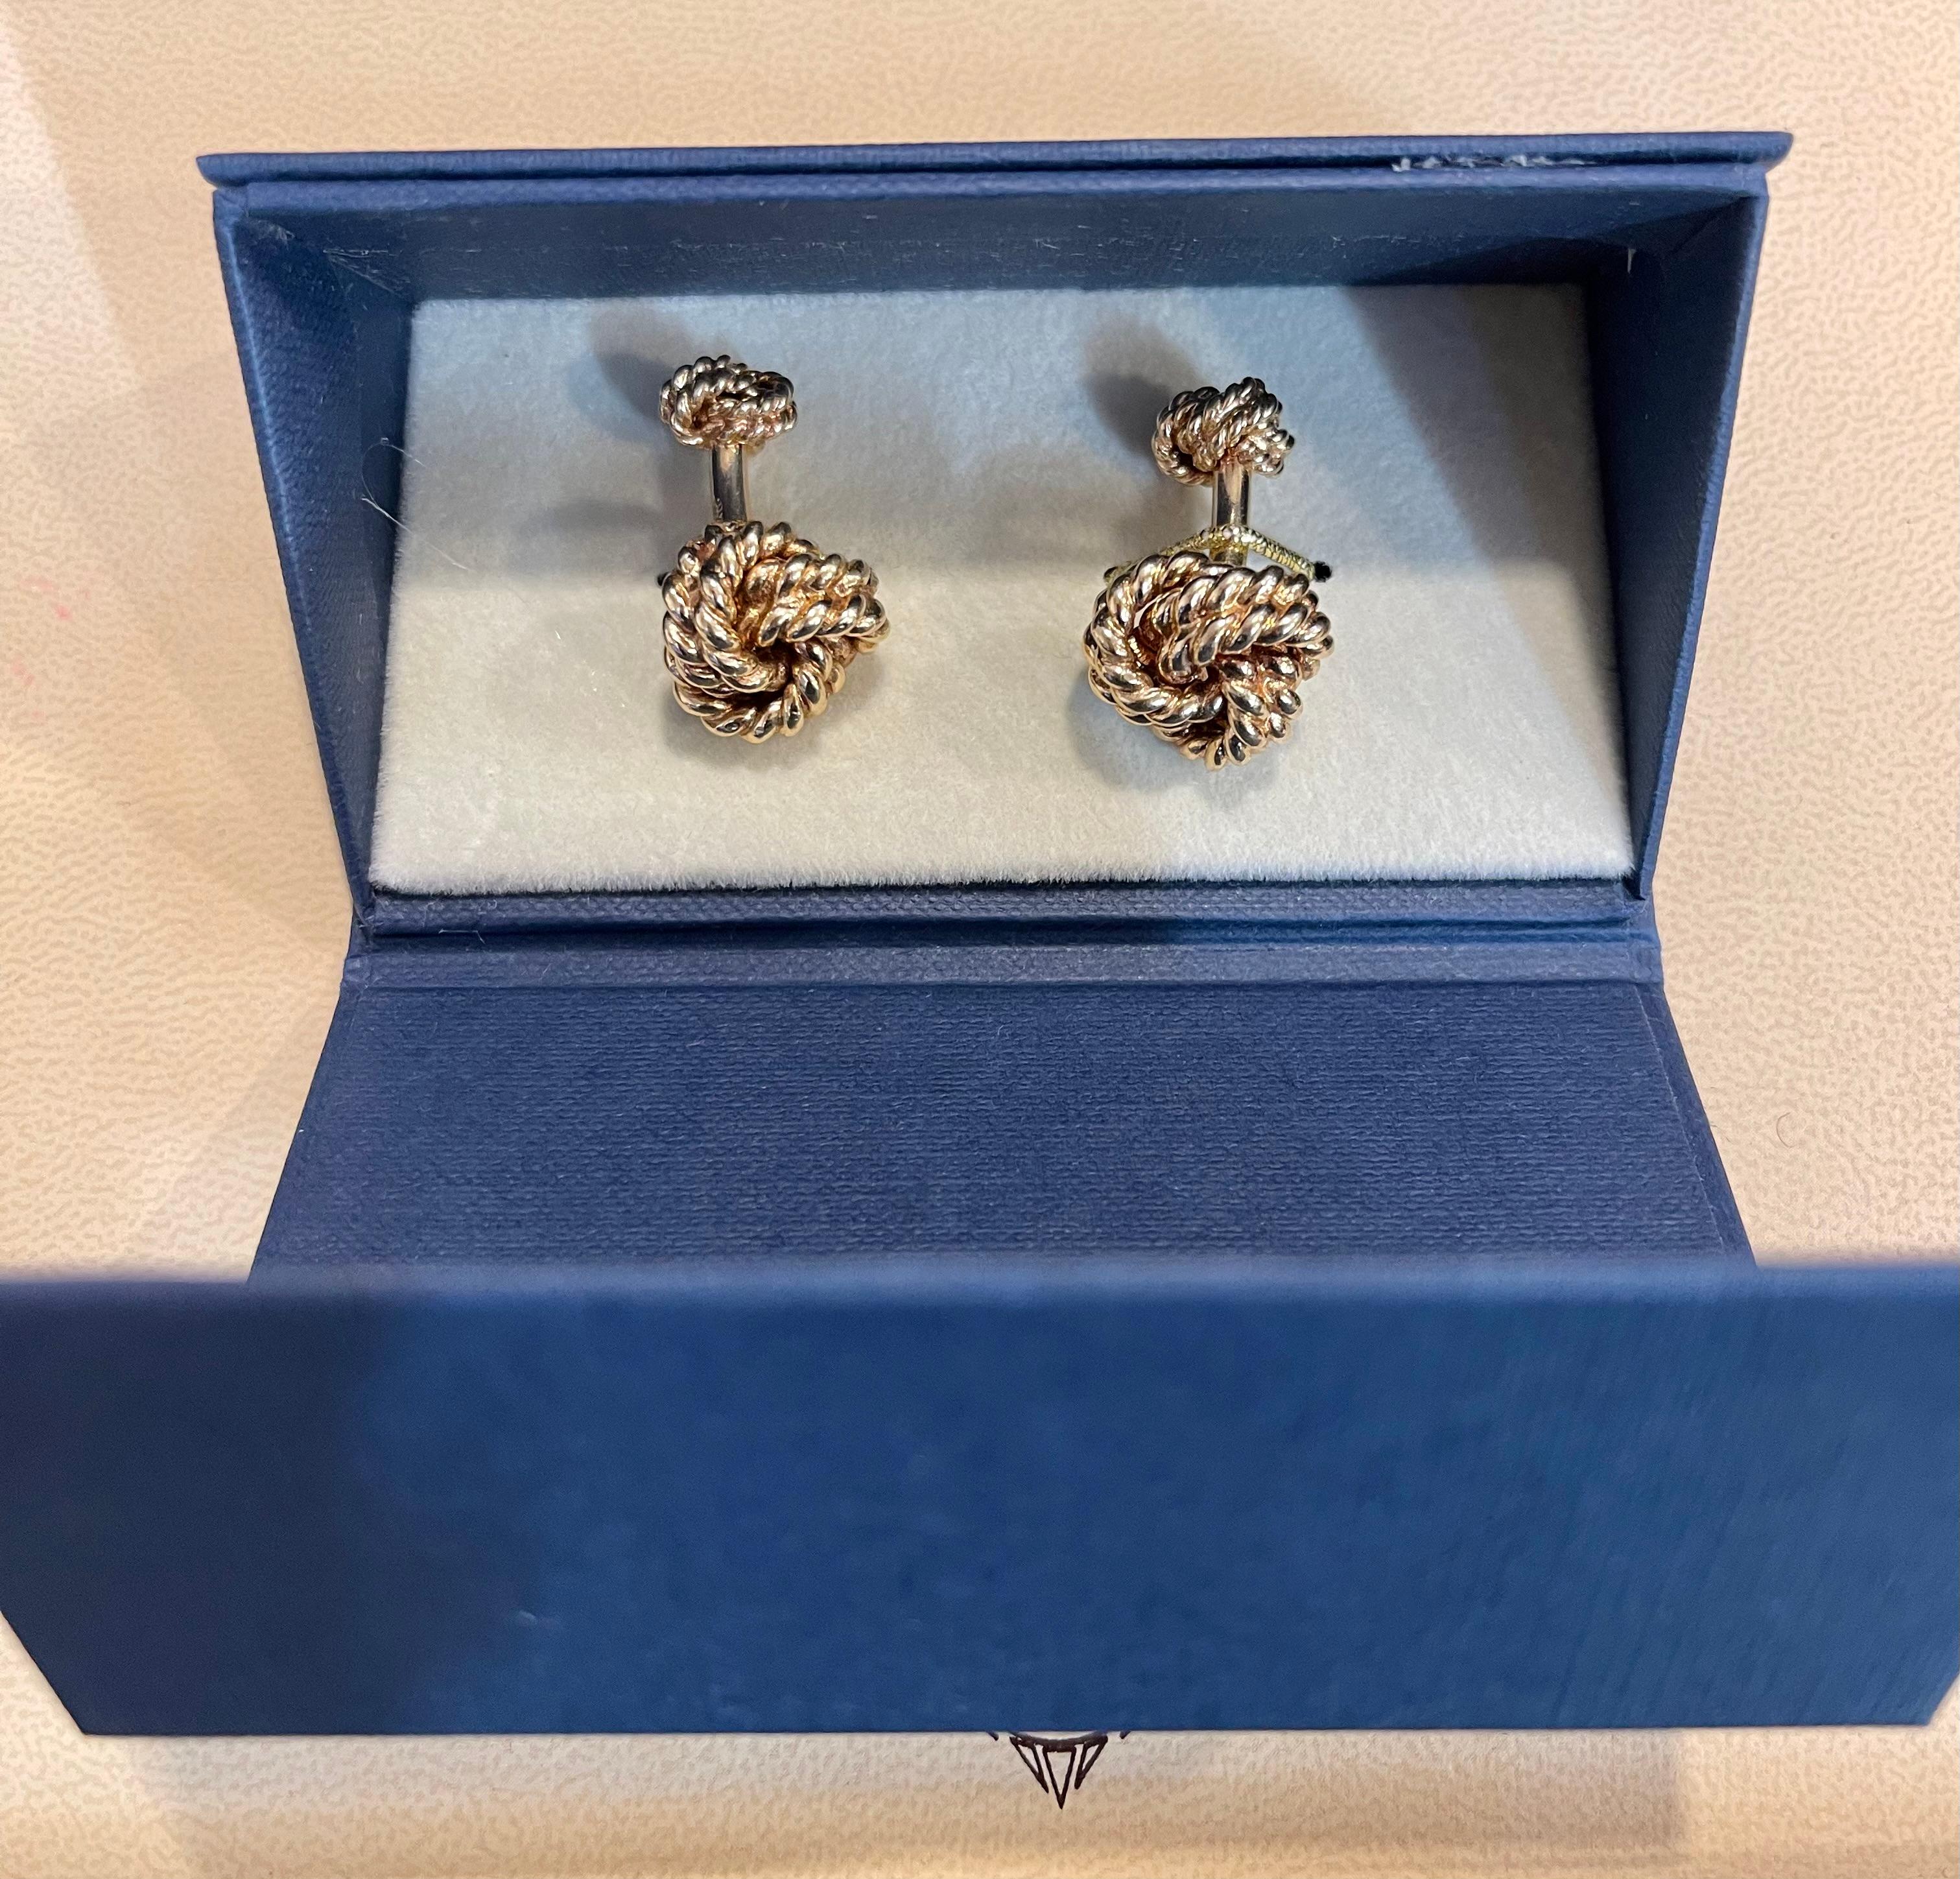 14k Gold Trinity Love Woven Knot Cuff Links in 14 Karat Yellow Gold 28 Gm, Men's In Excellent Condition For Sale In New York, NY